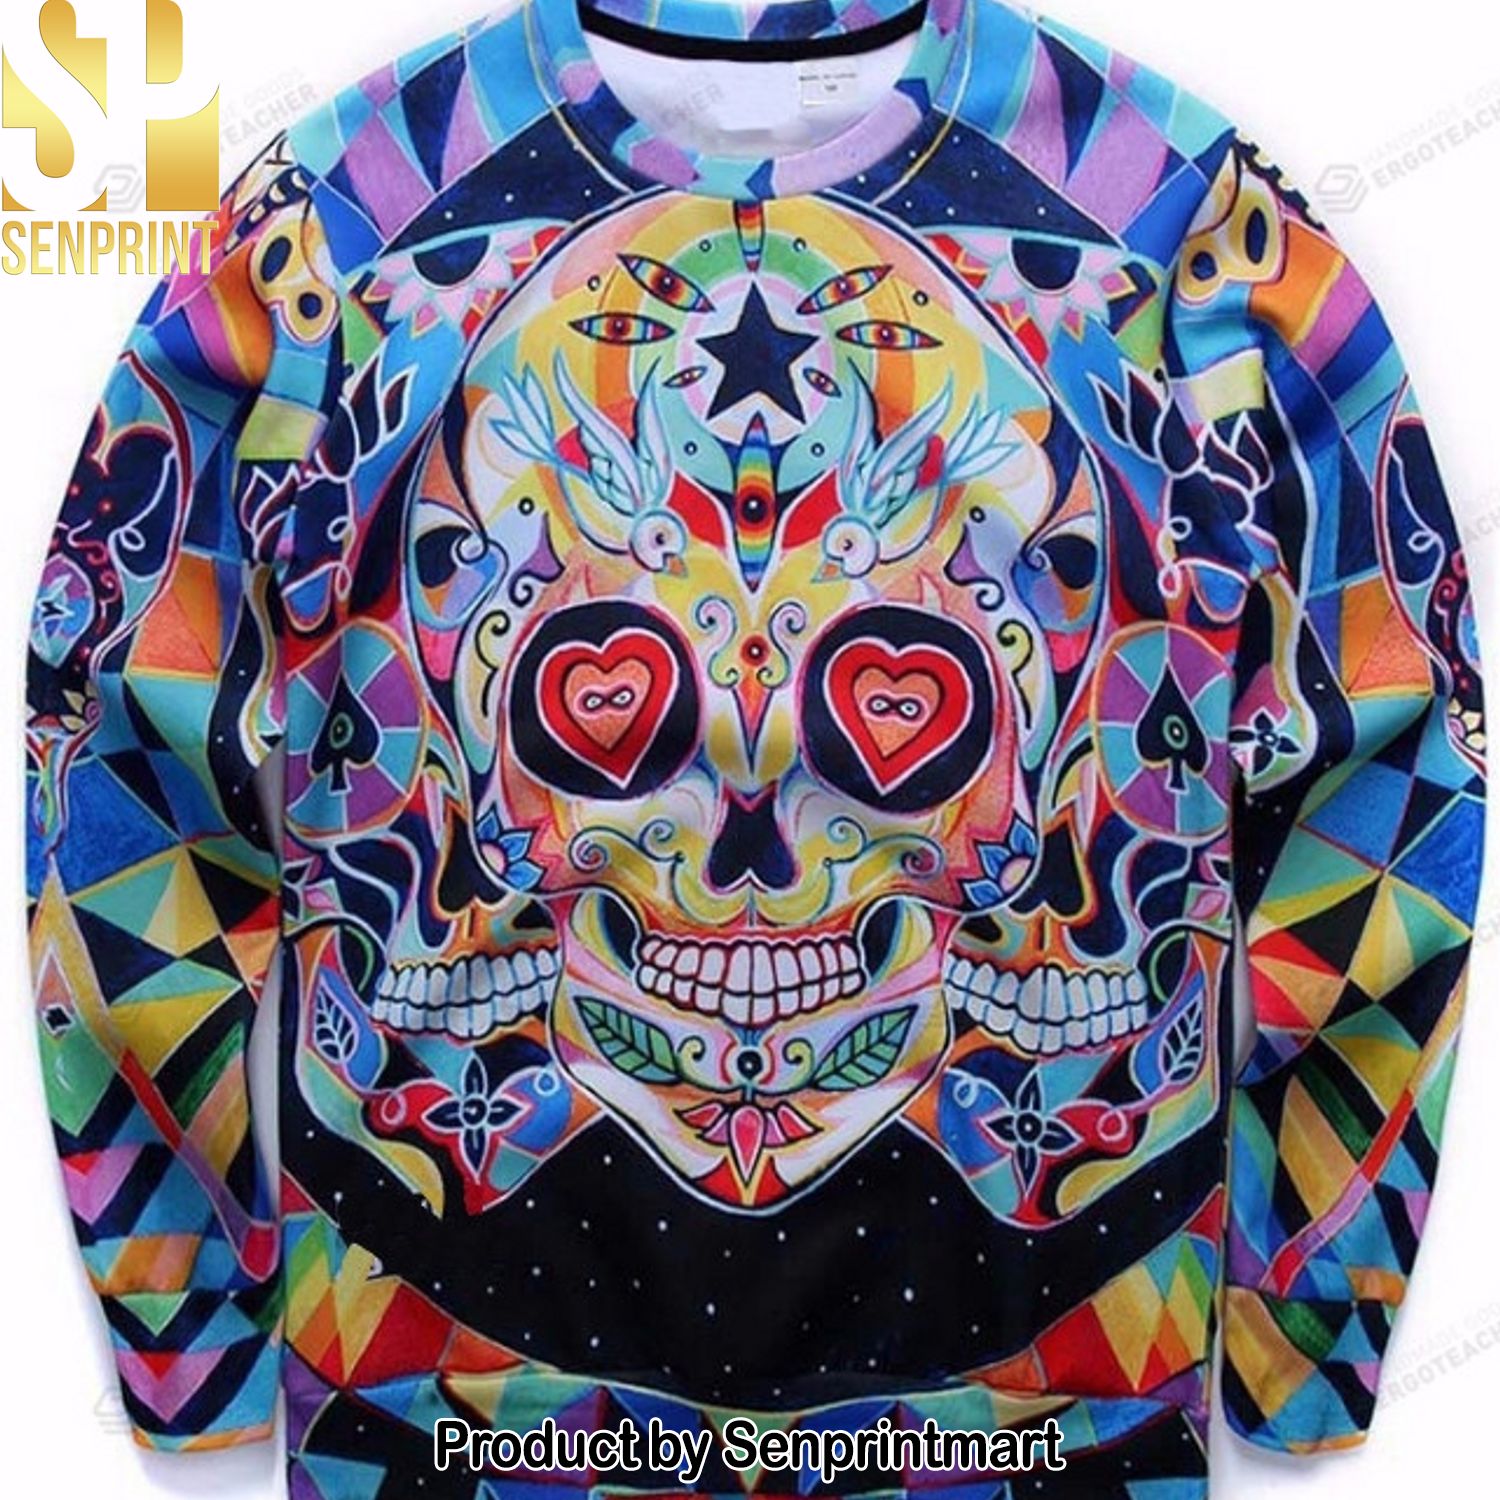 Psychedelic Trippy Af Sugar Skull Christmas Ugly Wool Knitted Sweater